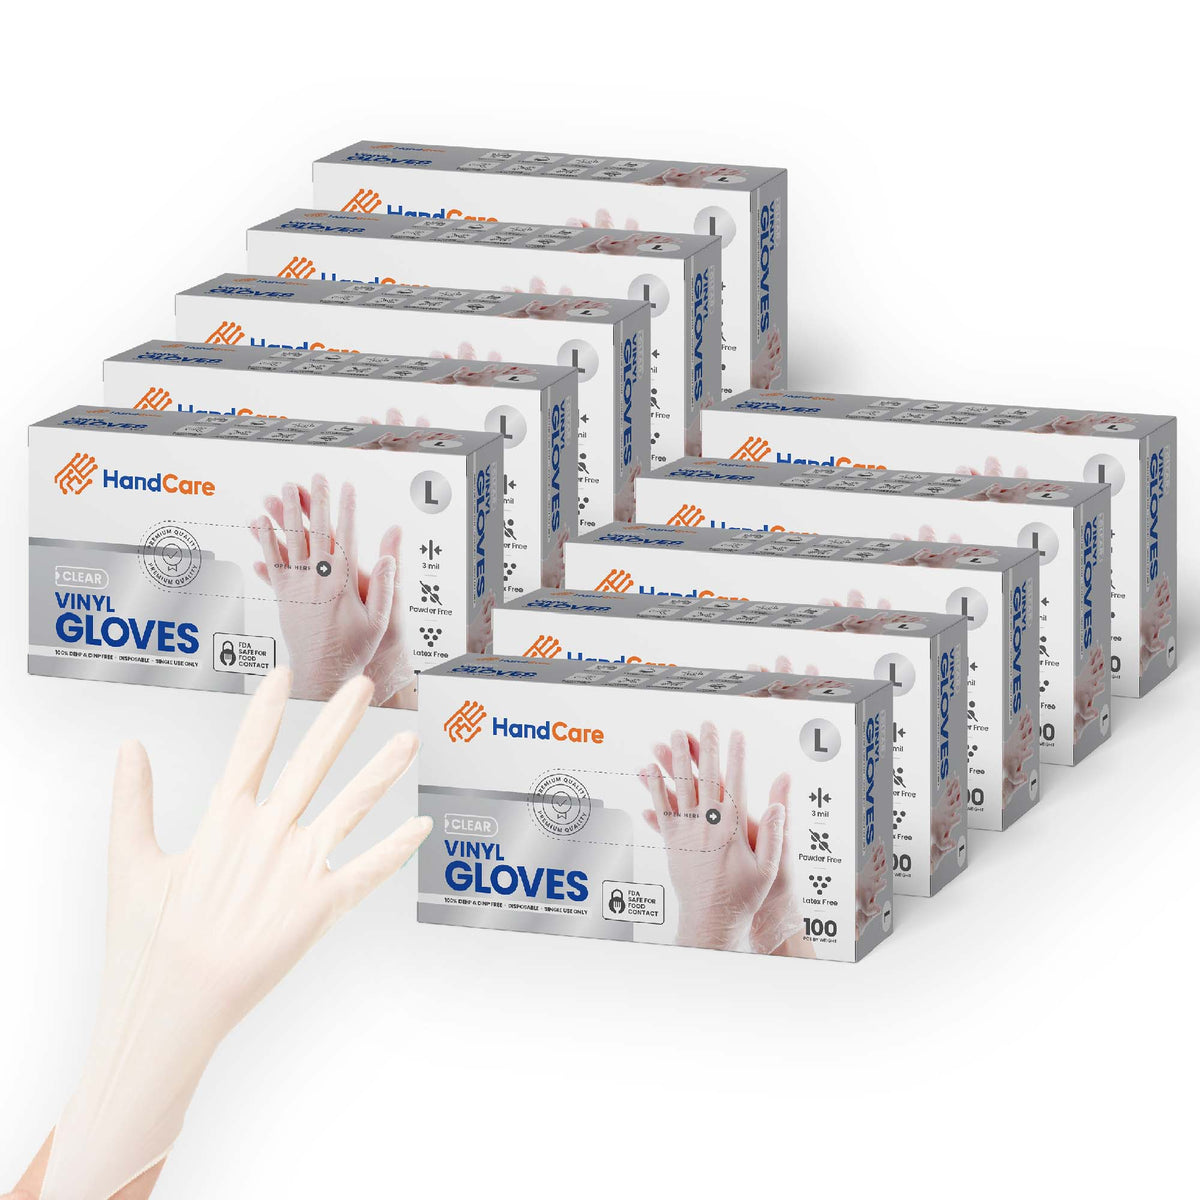 10 boxes of HandCare Vinyl Gloves (Clear) and when worn on hand